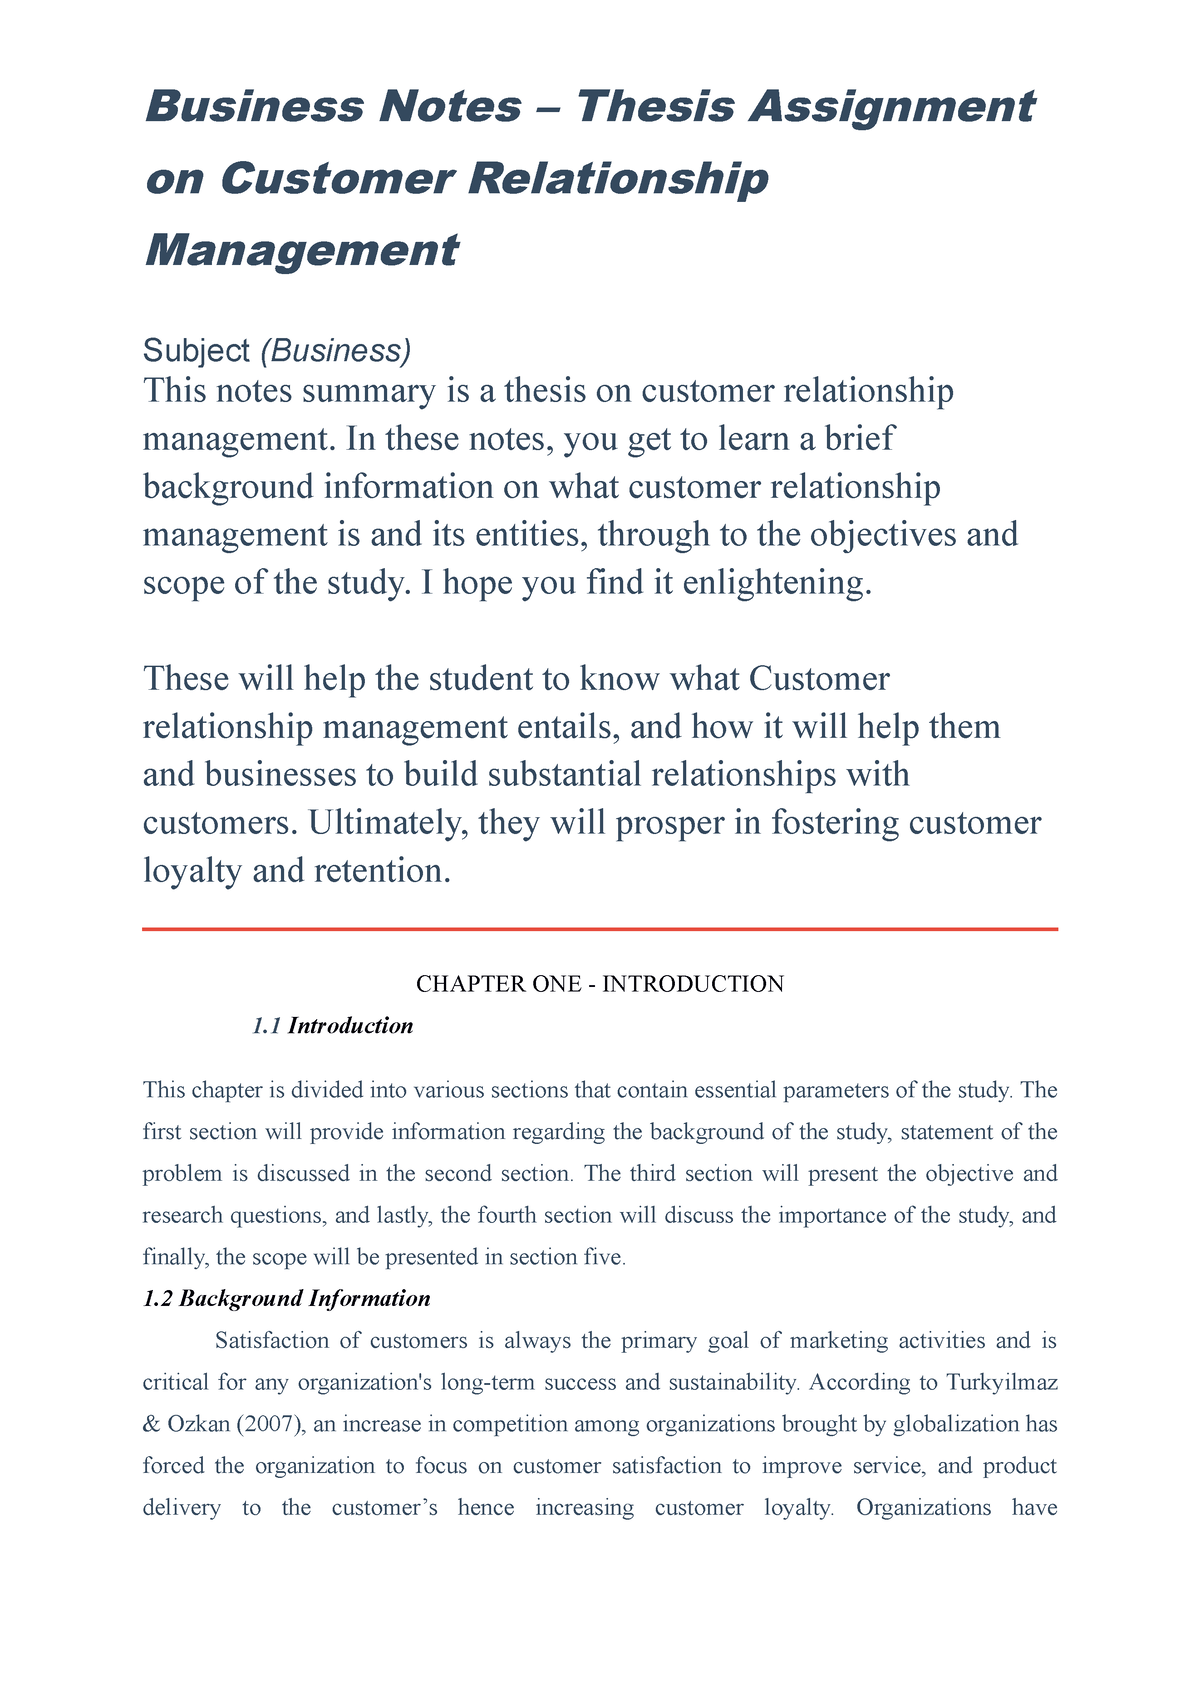 thesis on customer relationship management in banking sector